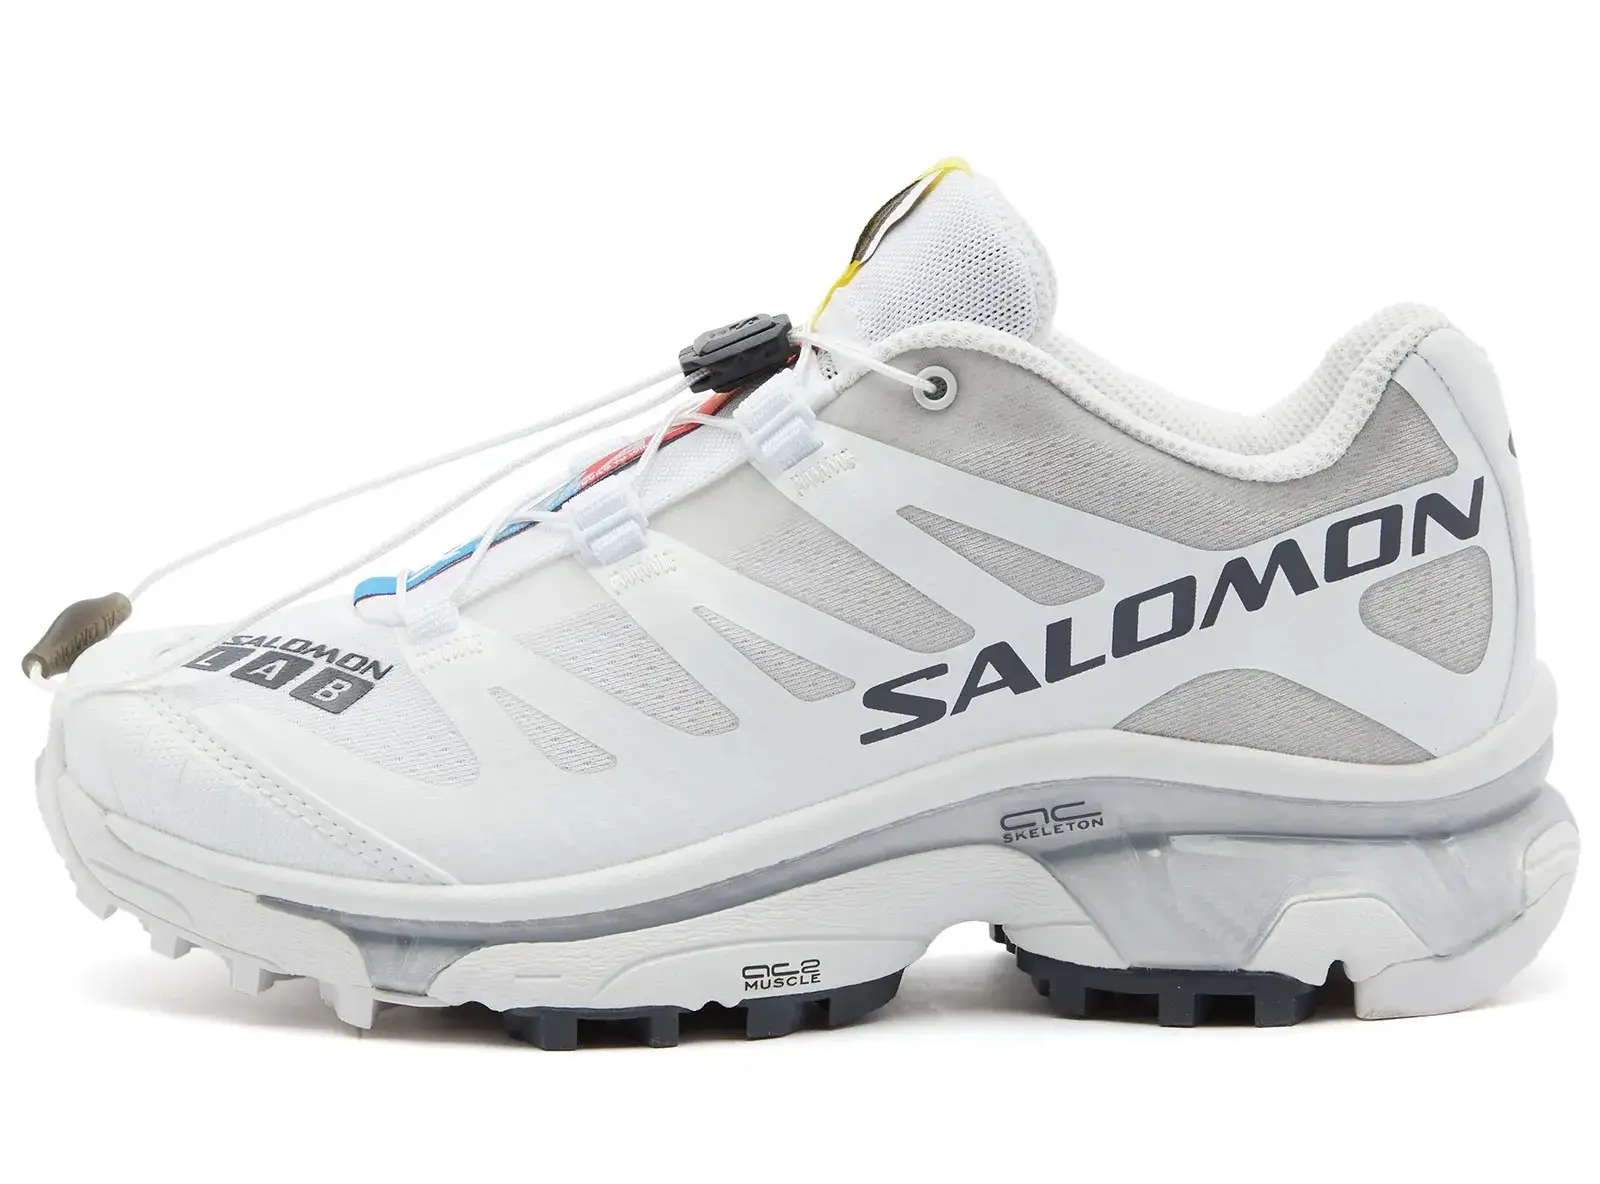 The Complete Salomon Shoe Sizing Guide